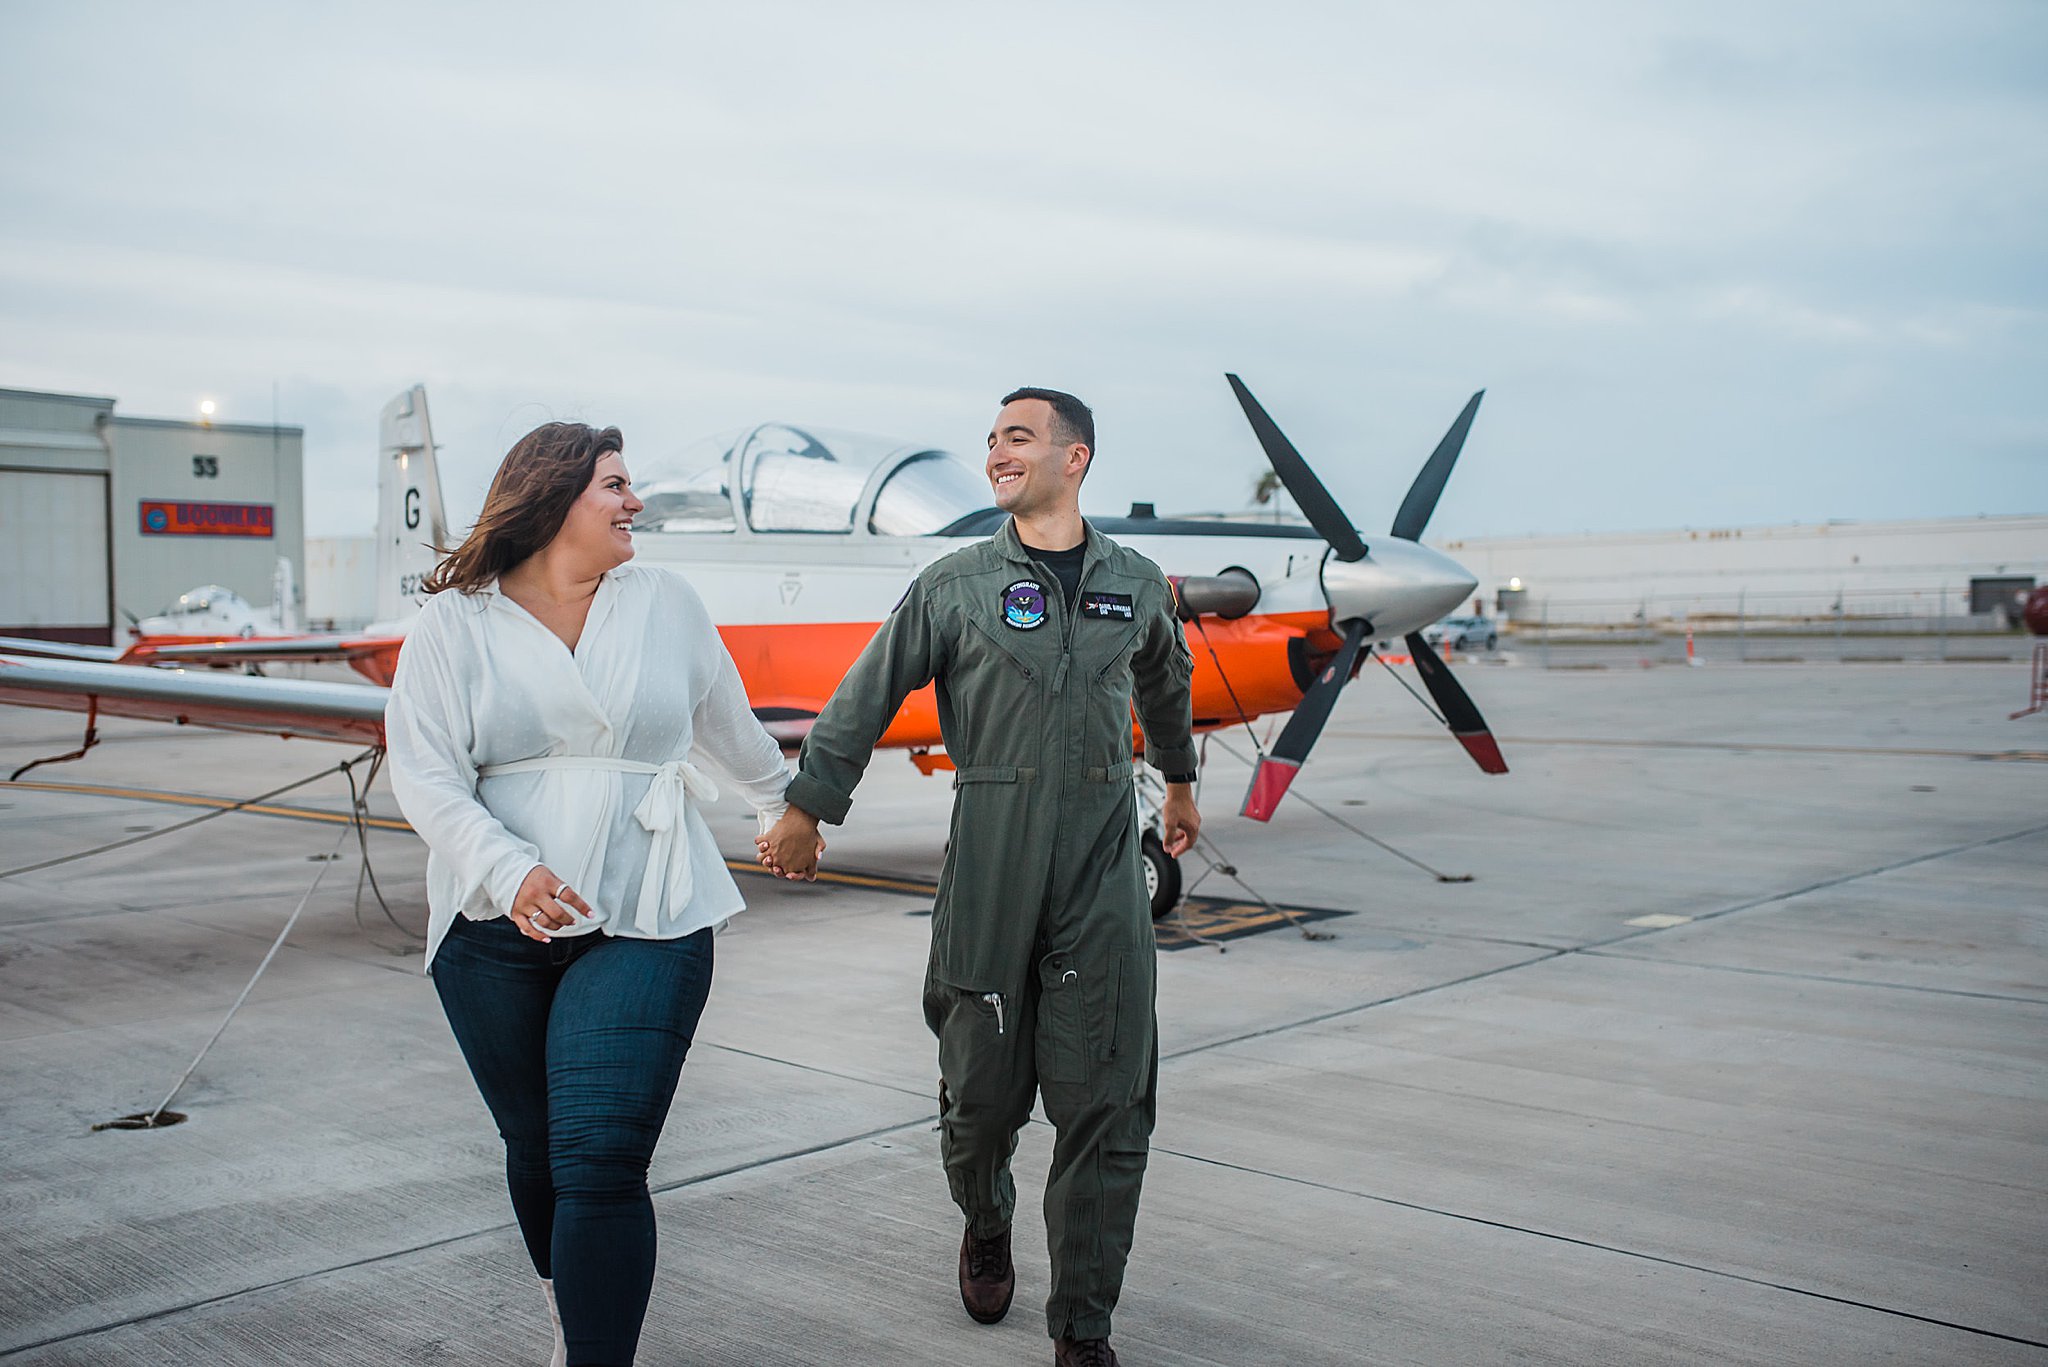 Navy Pilot in Green flight suit on flightline running in front of white plane with orange stripe with fiance in white top and blue jeans